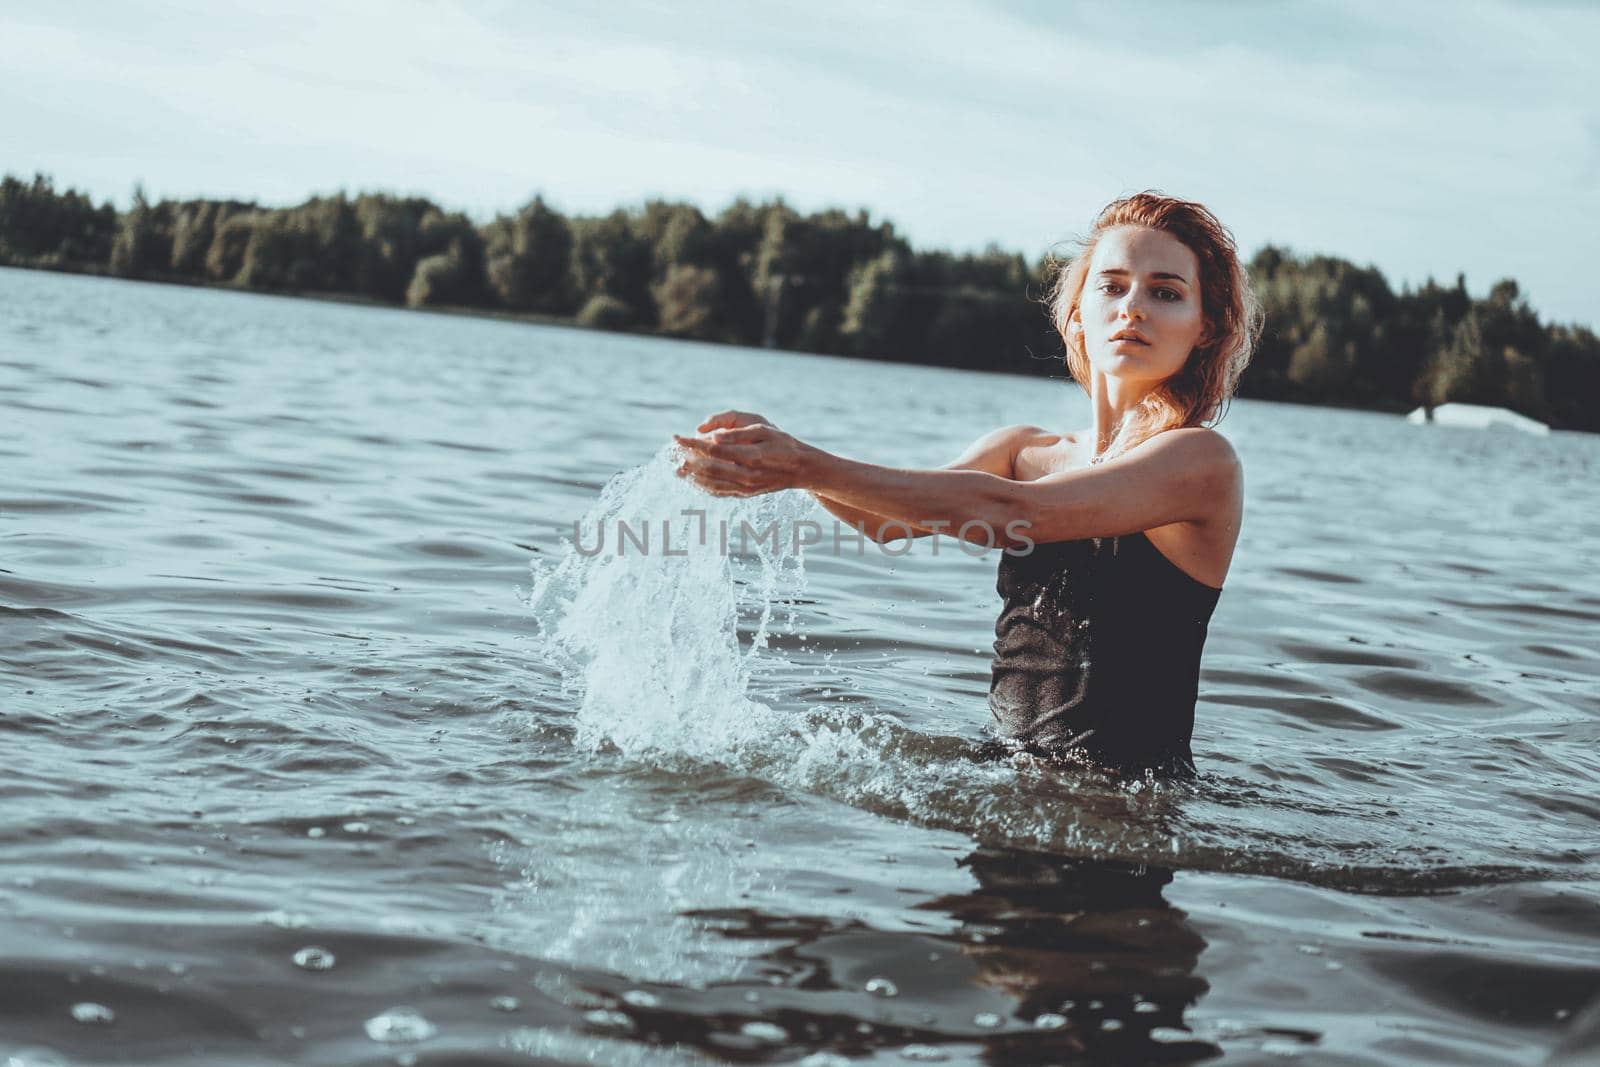 Young beautiful woman standing in the water. Black swimsuit. Vintage style